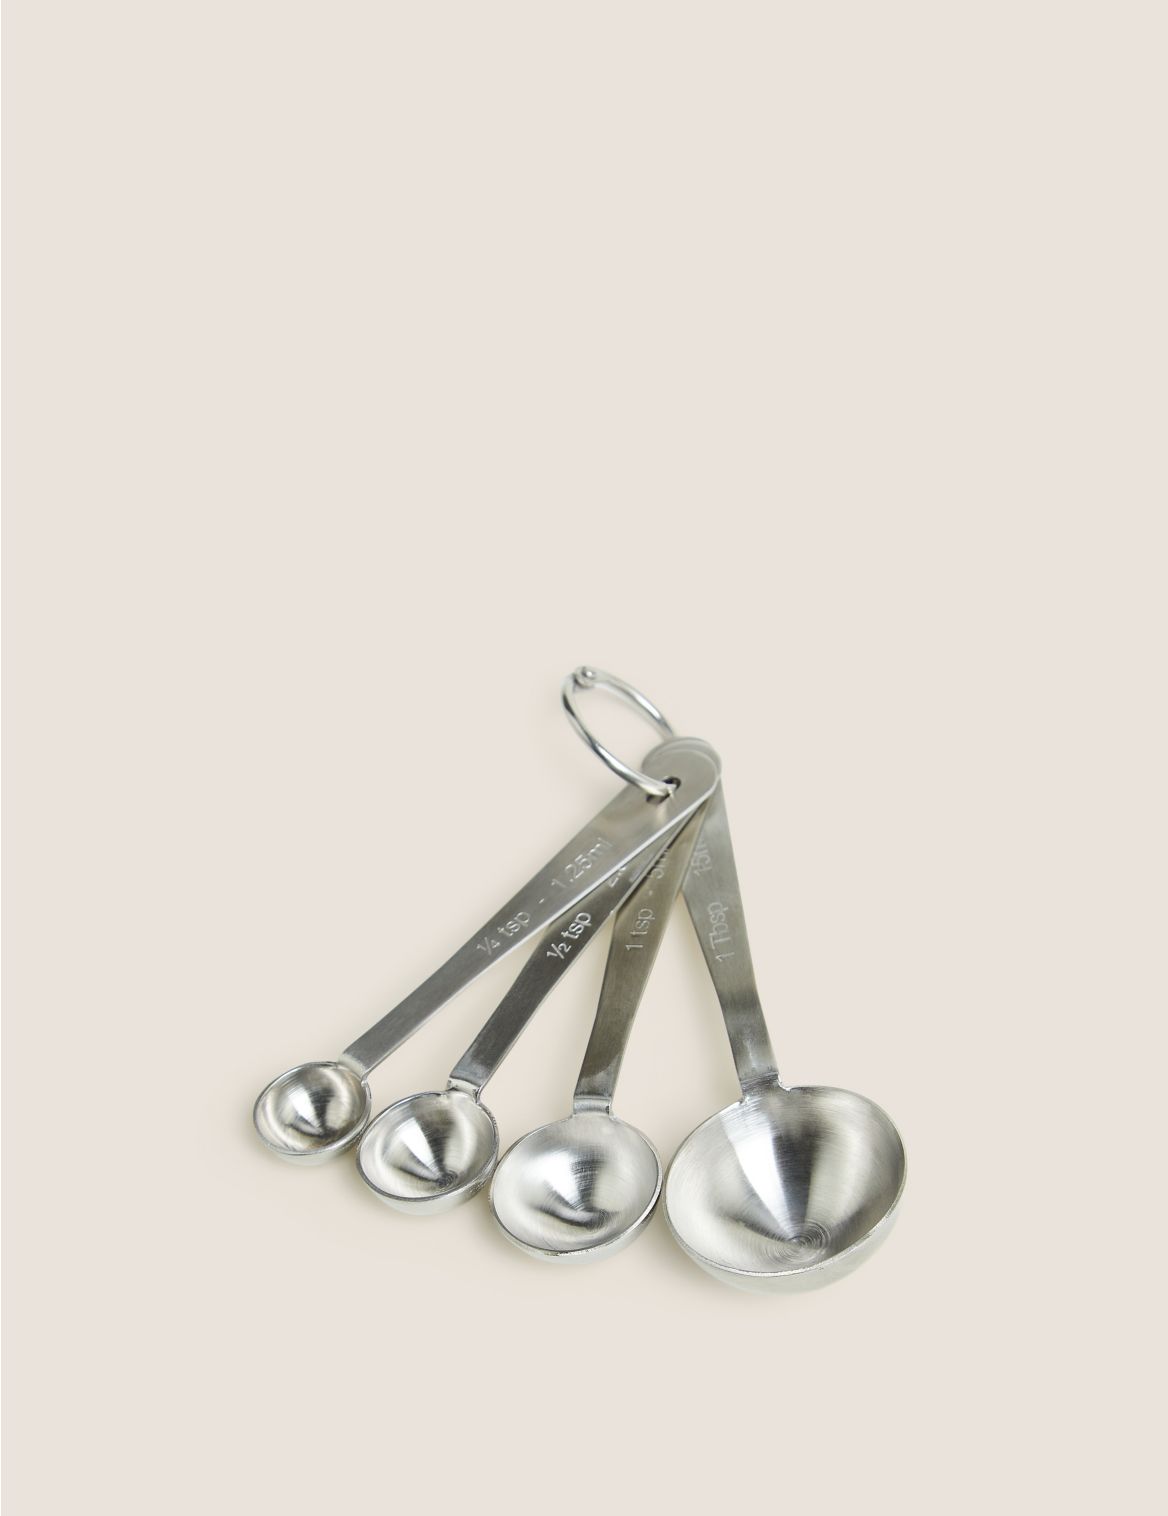 Image of Set of 4 Stainless Steel Measuring Spoons silver